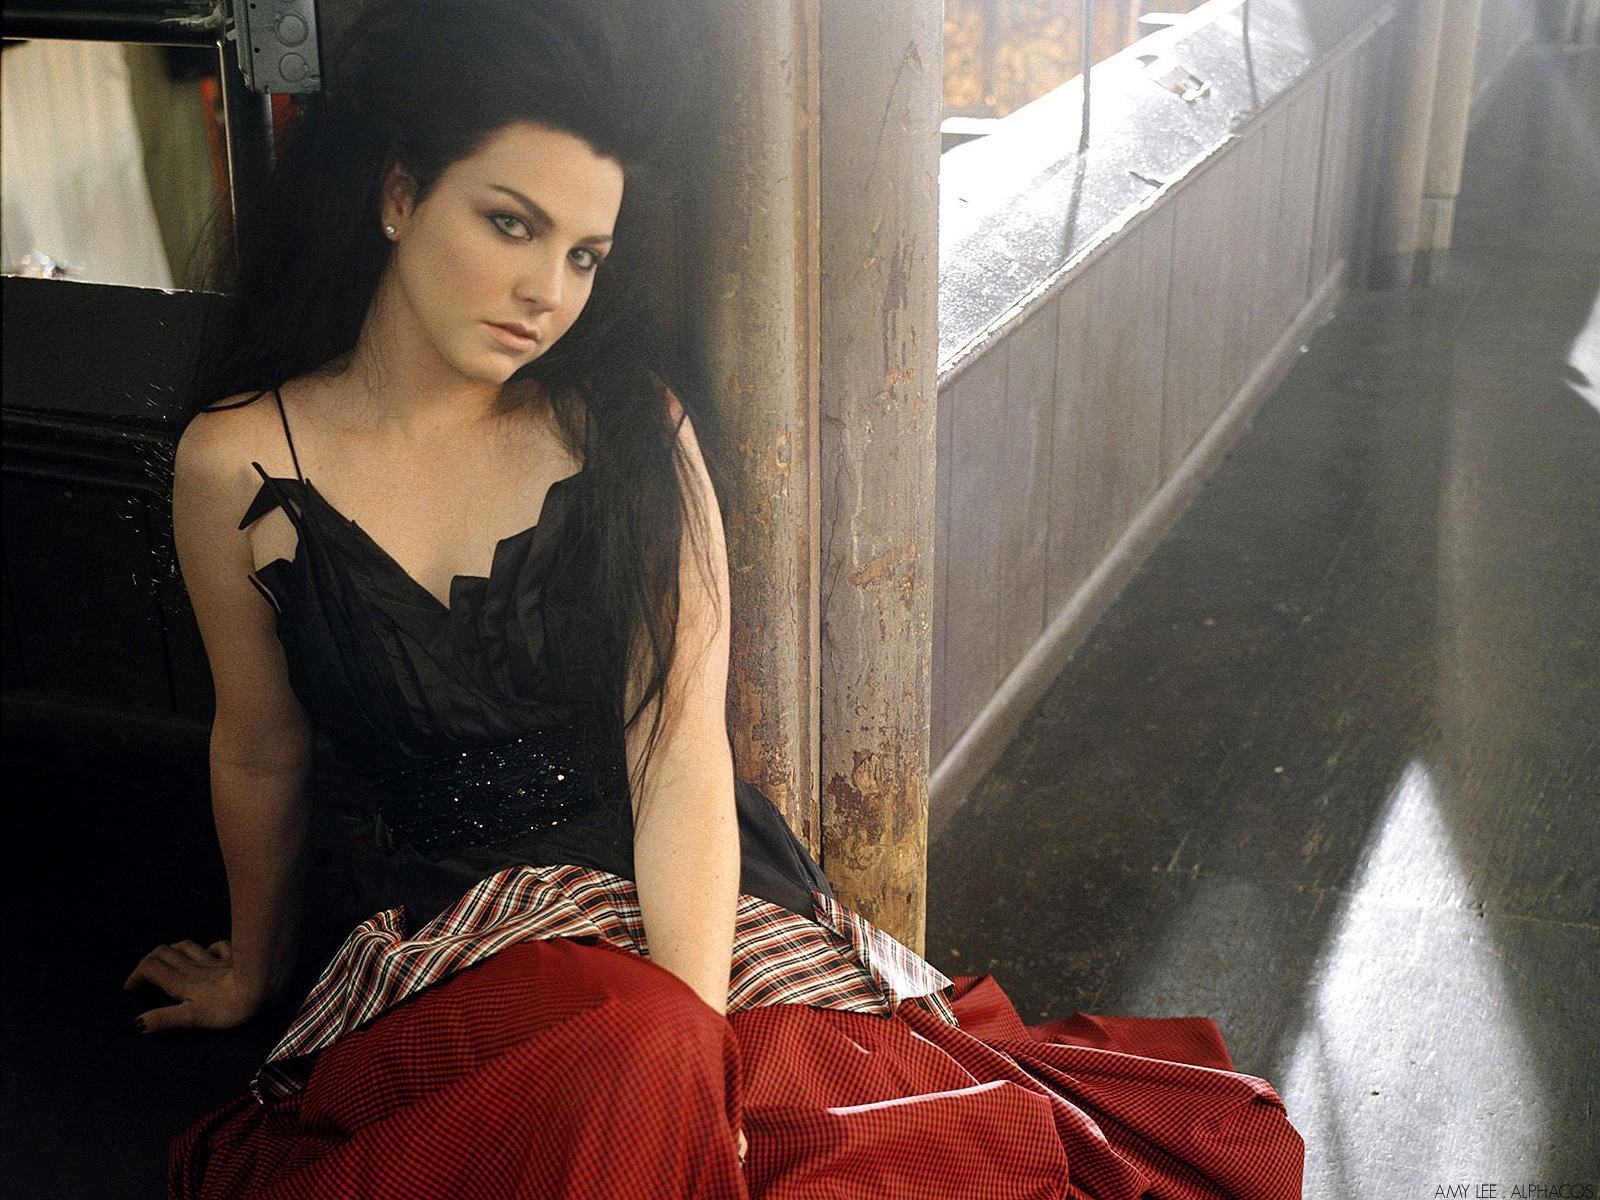 Amy Lee Image HD Wallpaper And Background Photos